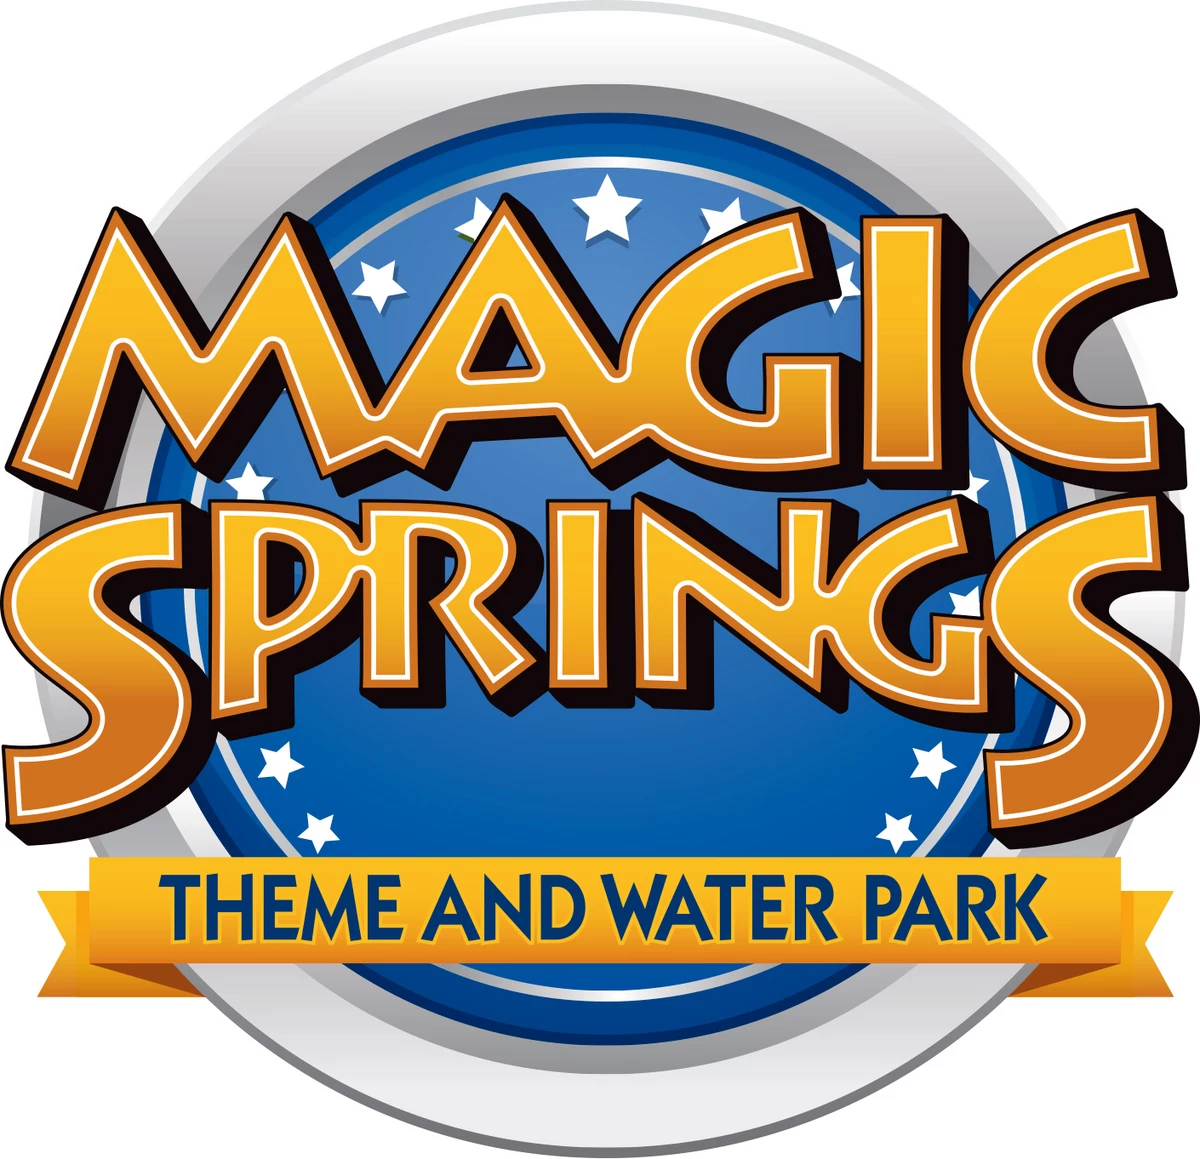 Magic Springs Summer Concerts Series Schedule